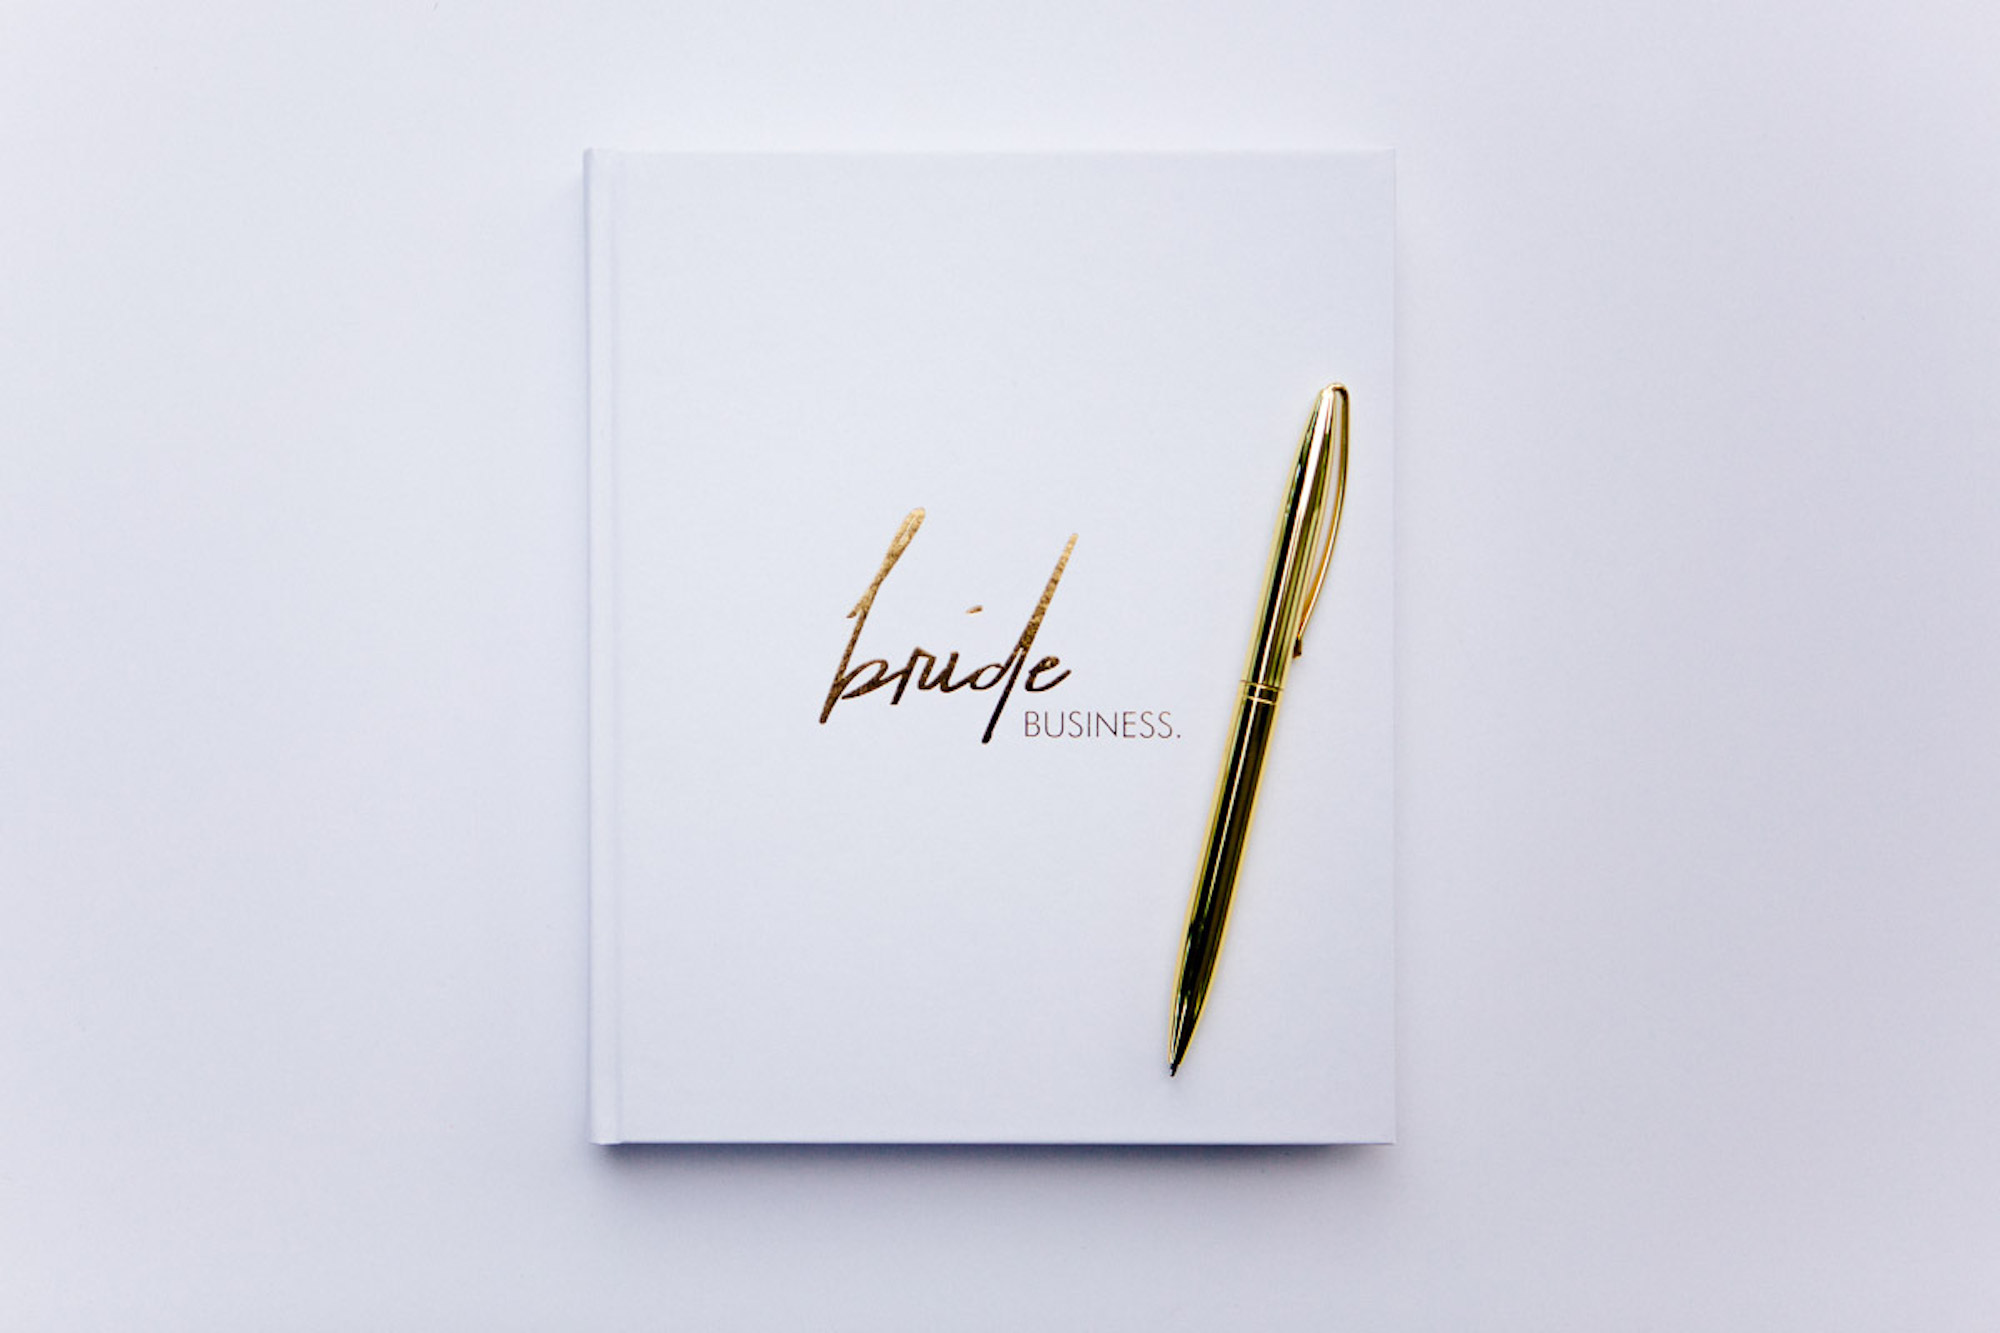 A notebook with 'bride business' on the cover and a gold pen on a plain background